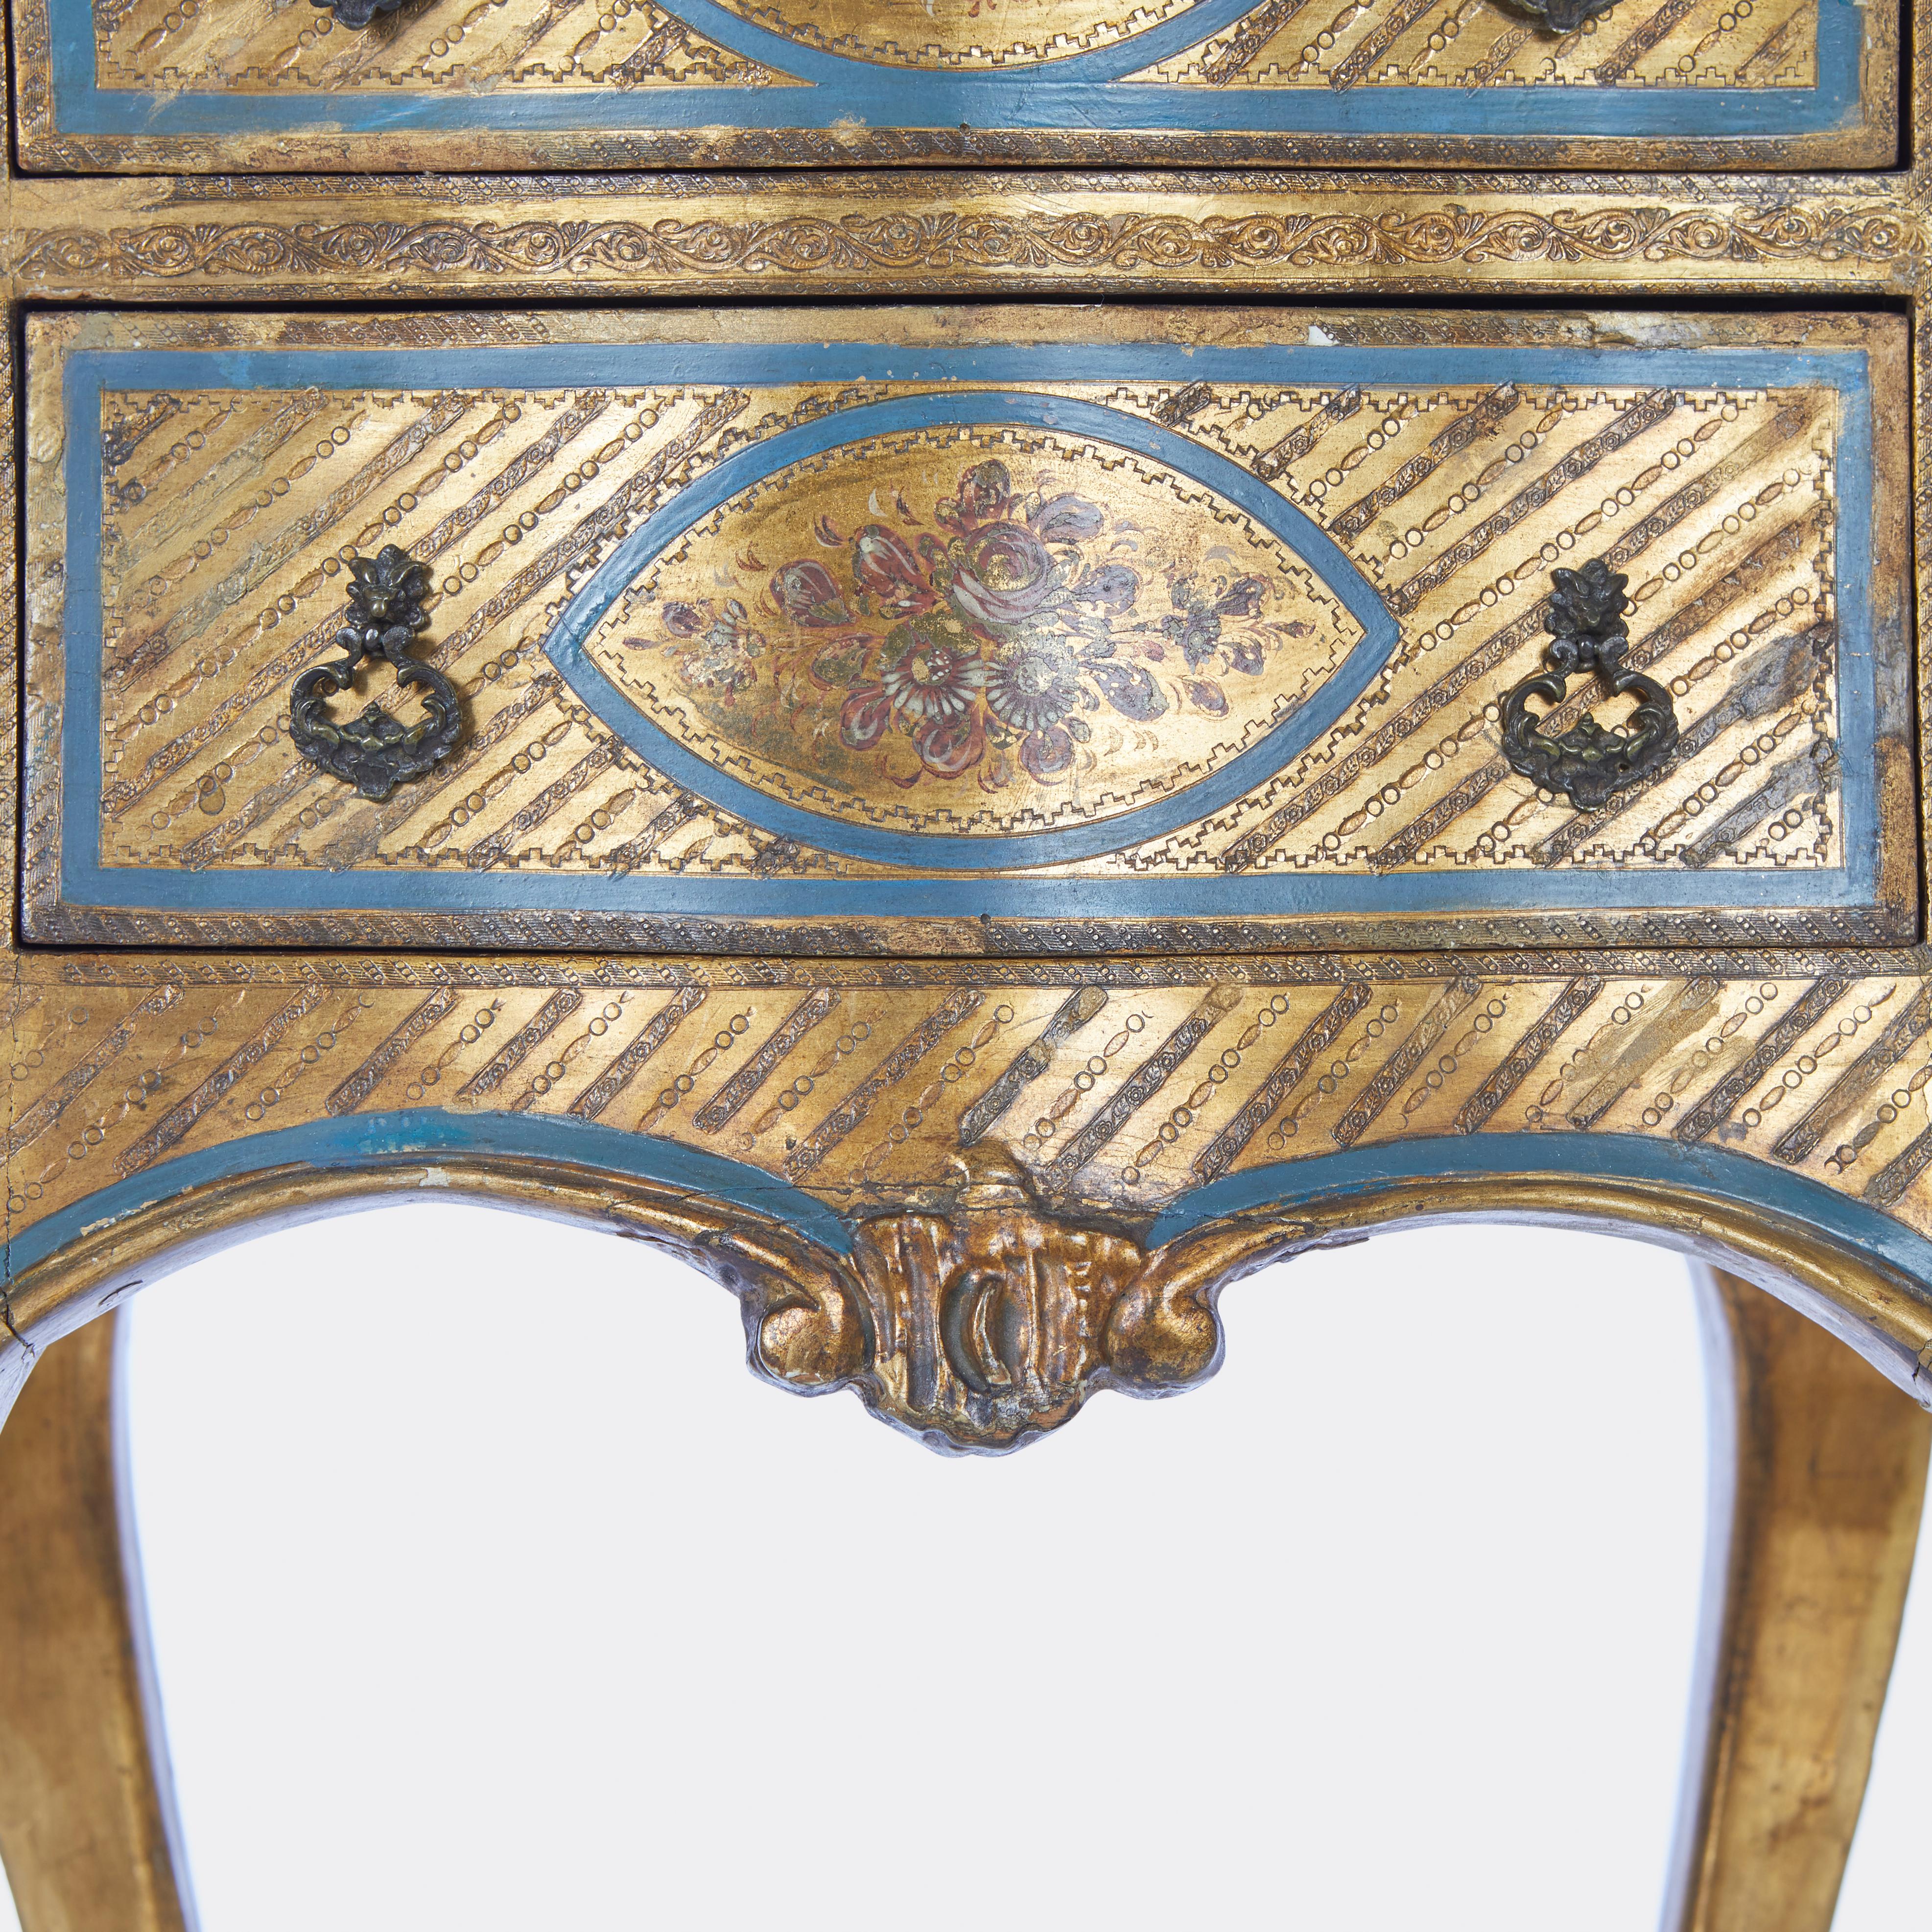 Pair of Italian side tables with 3 drawers having cabriole legs and bombe front, back and side, having incised decoration overall with gilt and blue painted finish. Circa 1930.

Measures: 15.5''W x 14.5''D x 32''H, 11''W x 10''D at the top.